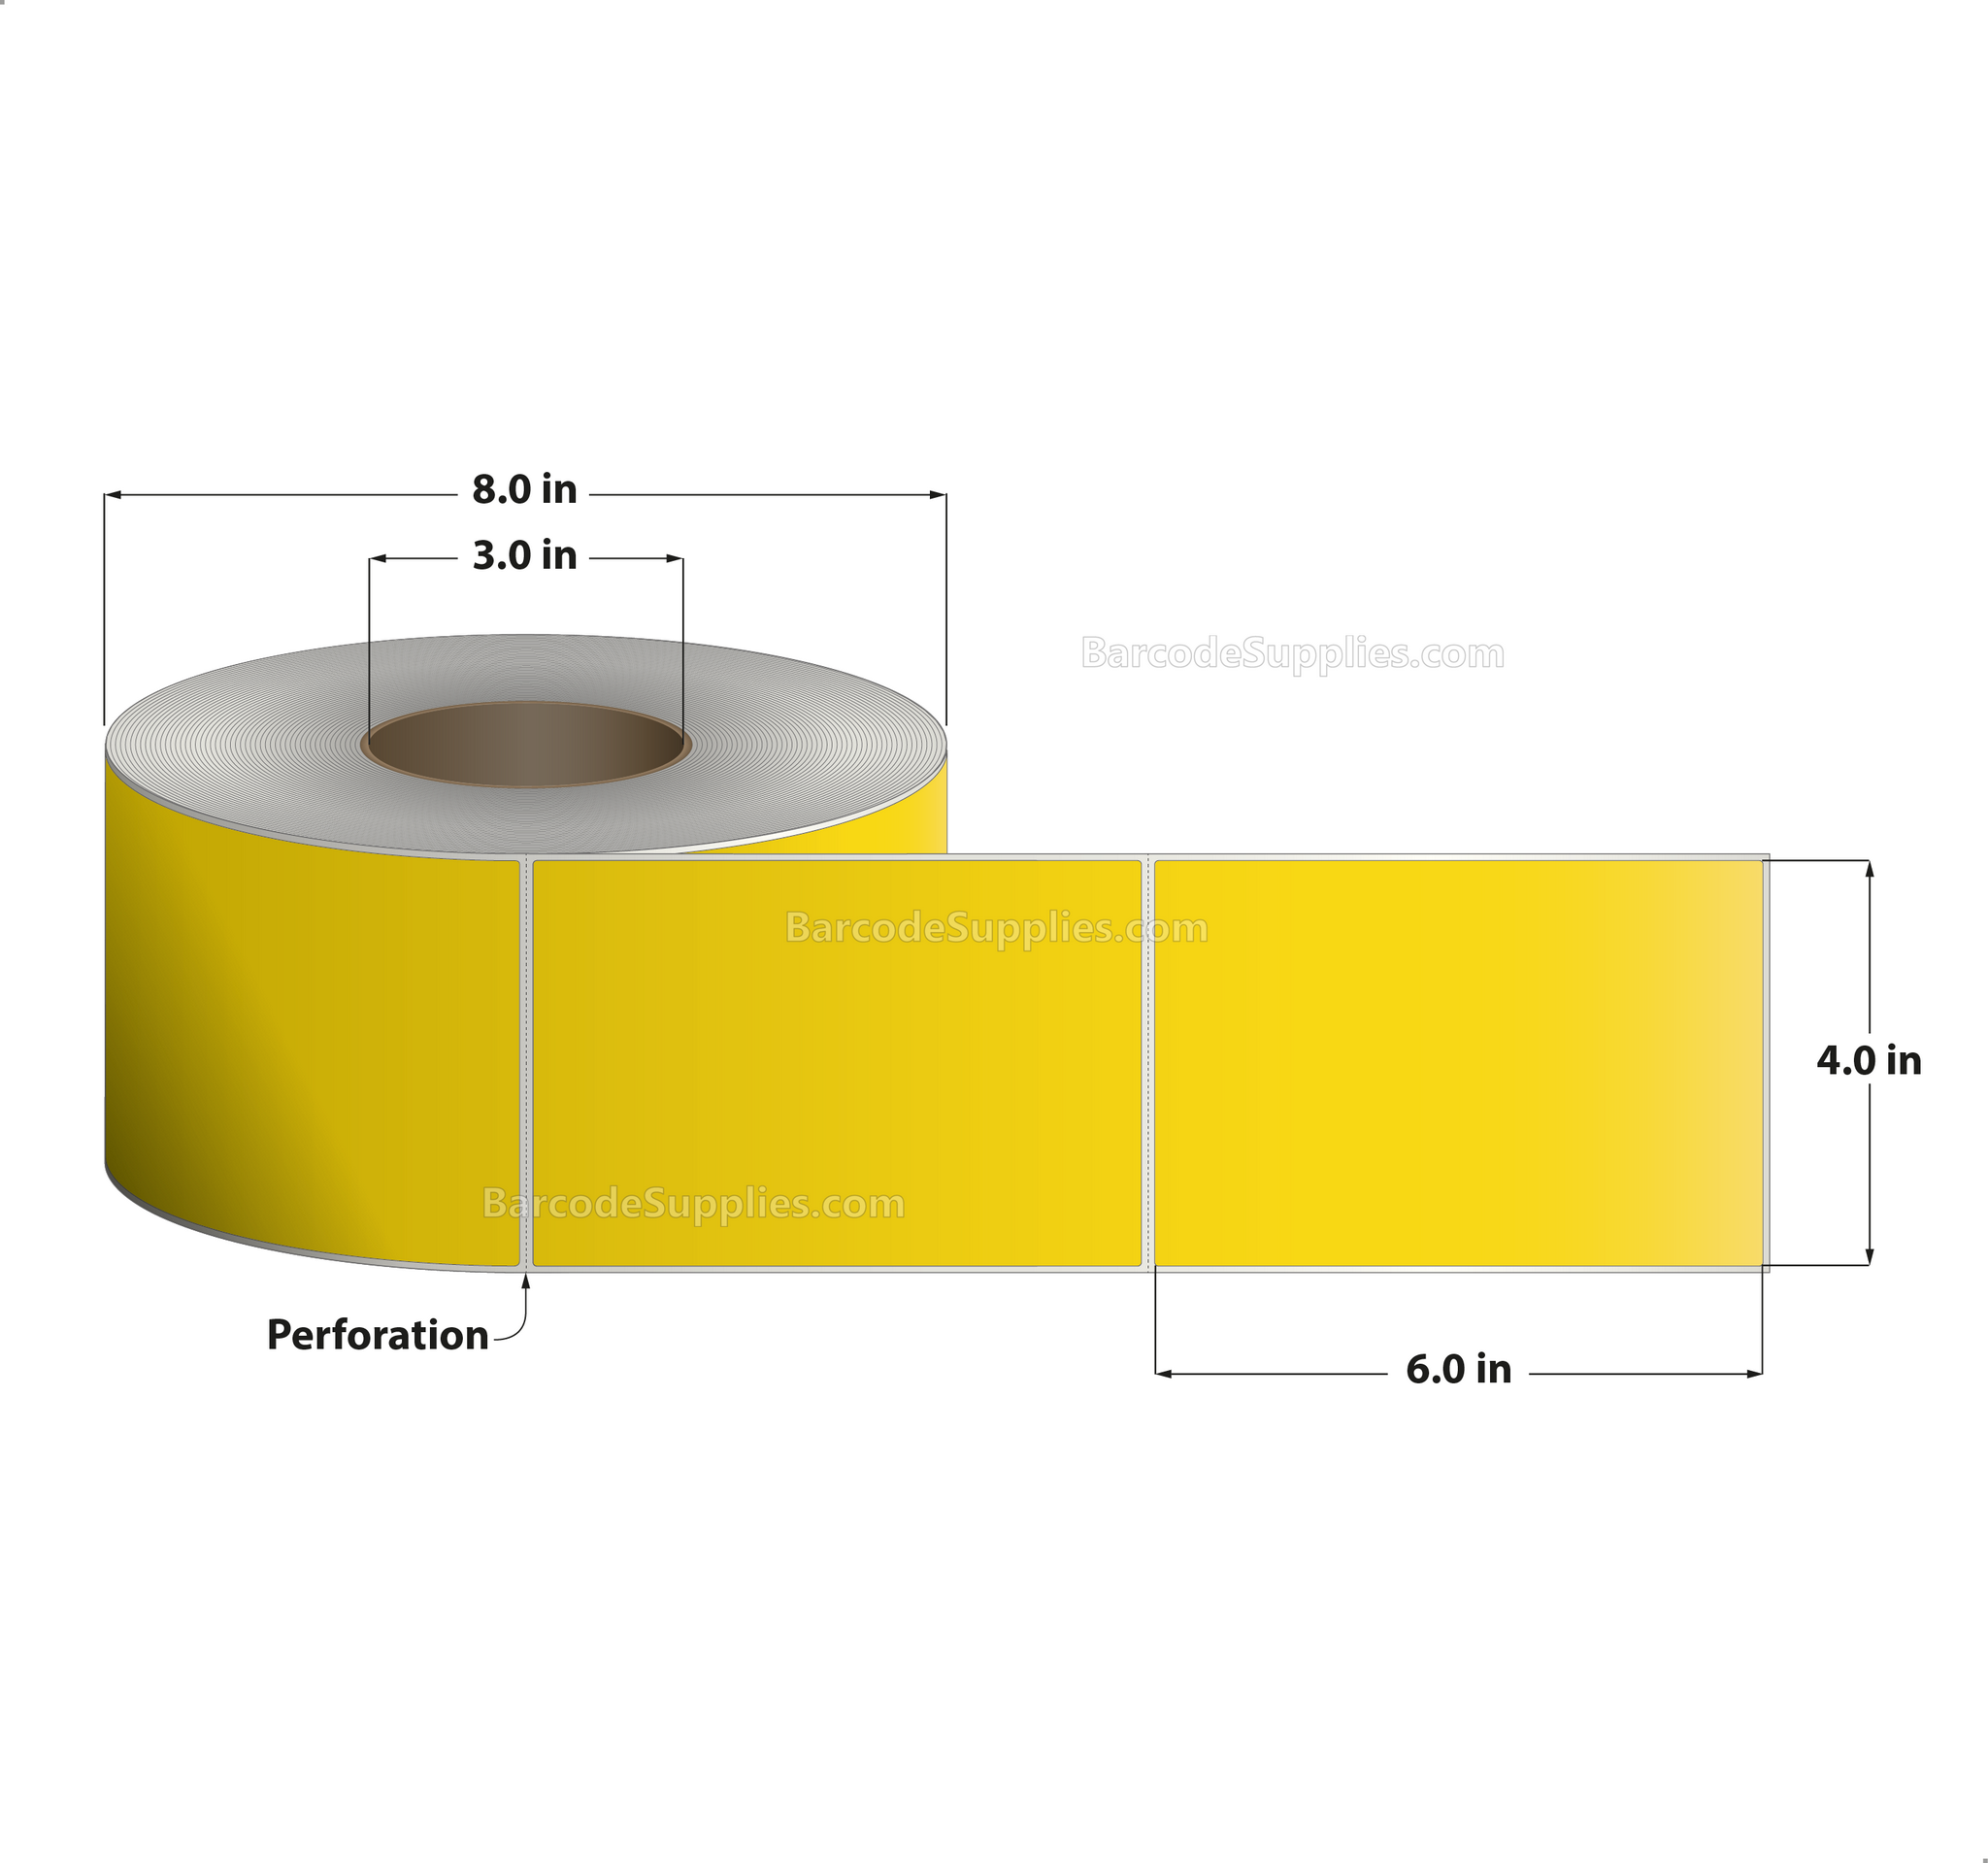 4 x 6 Thermal Transfer Pantone Yellow Labels With Permanent Adhesive - Perforated - 1000 Labels Per Roll - Carton Of 4 Rolls - 4000 Labels Total - MPN: RFC-4-6-1000-YL